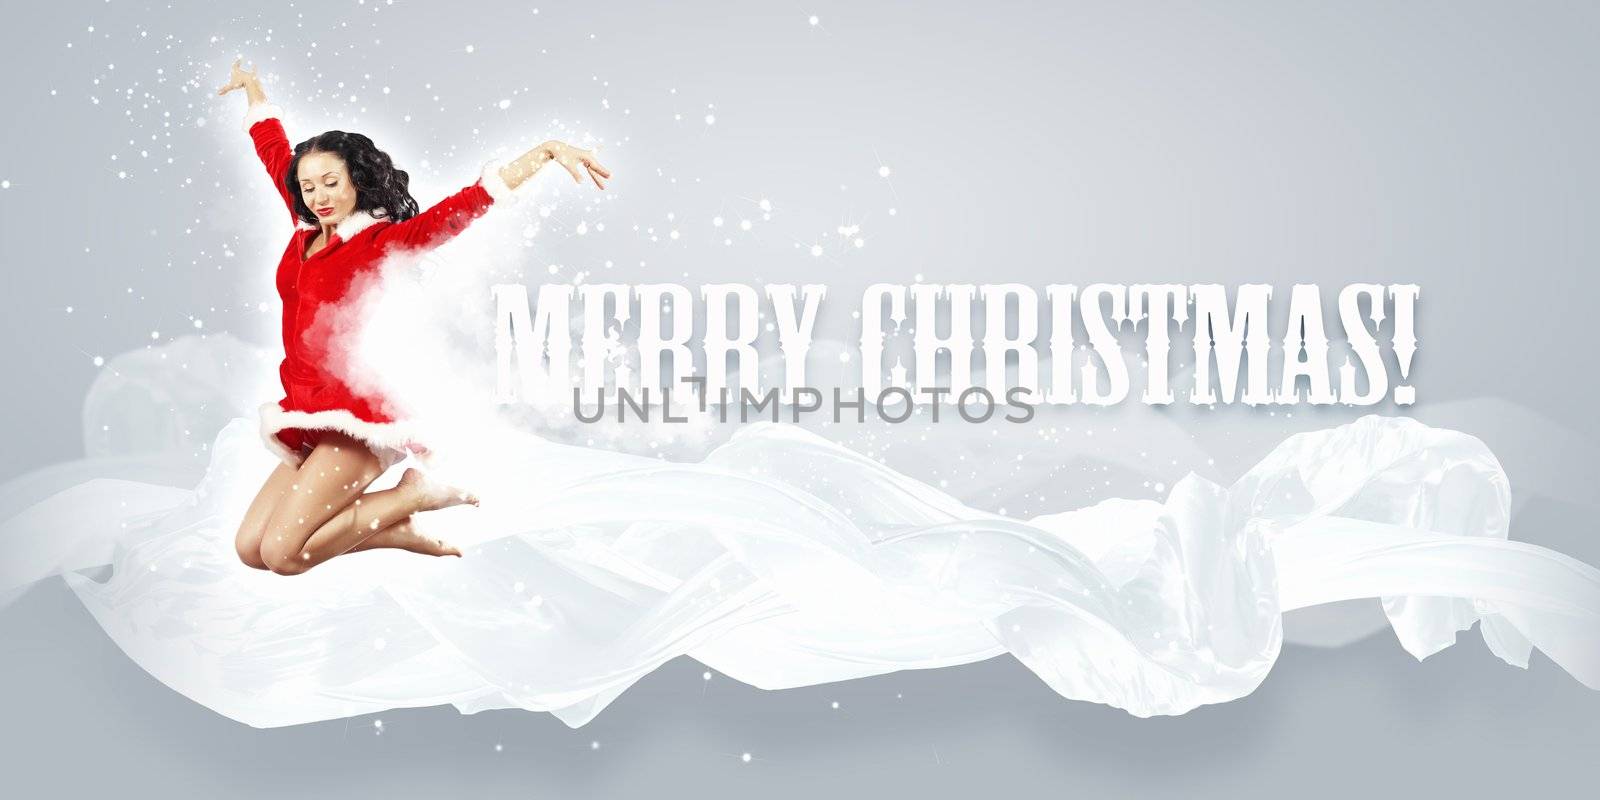 Happy smiling woman in red xmas costume jumping high